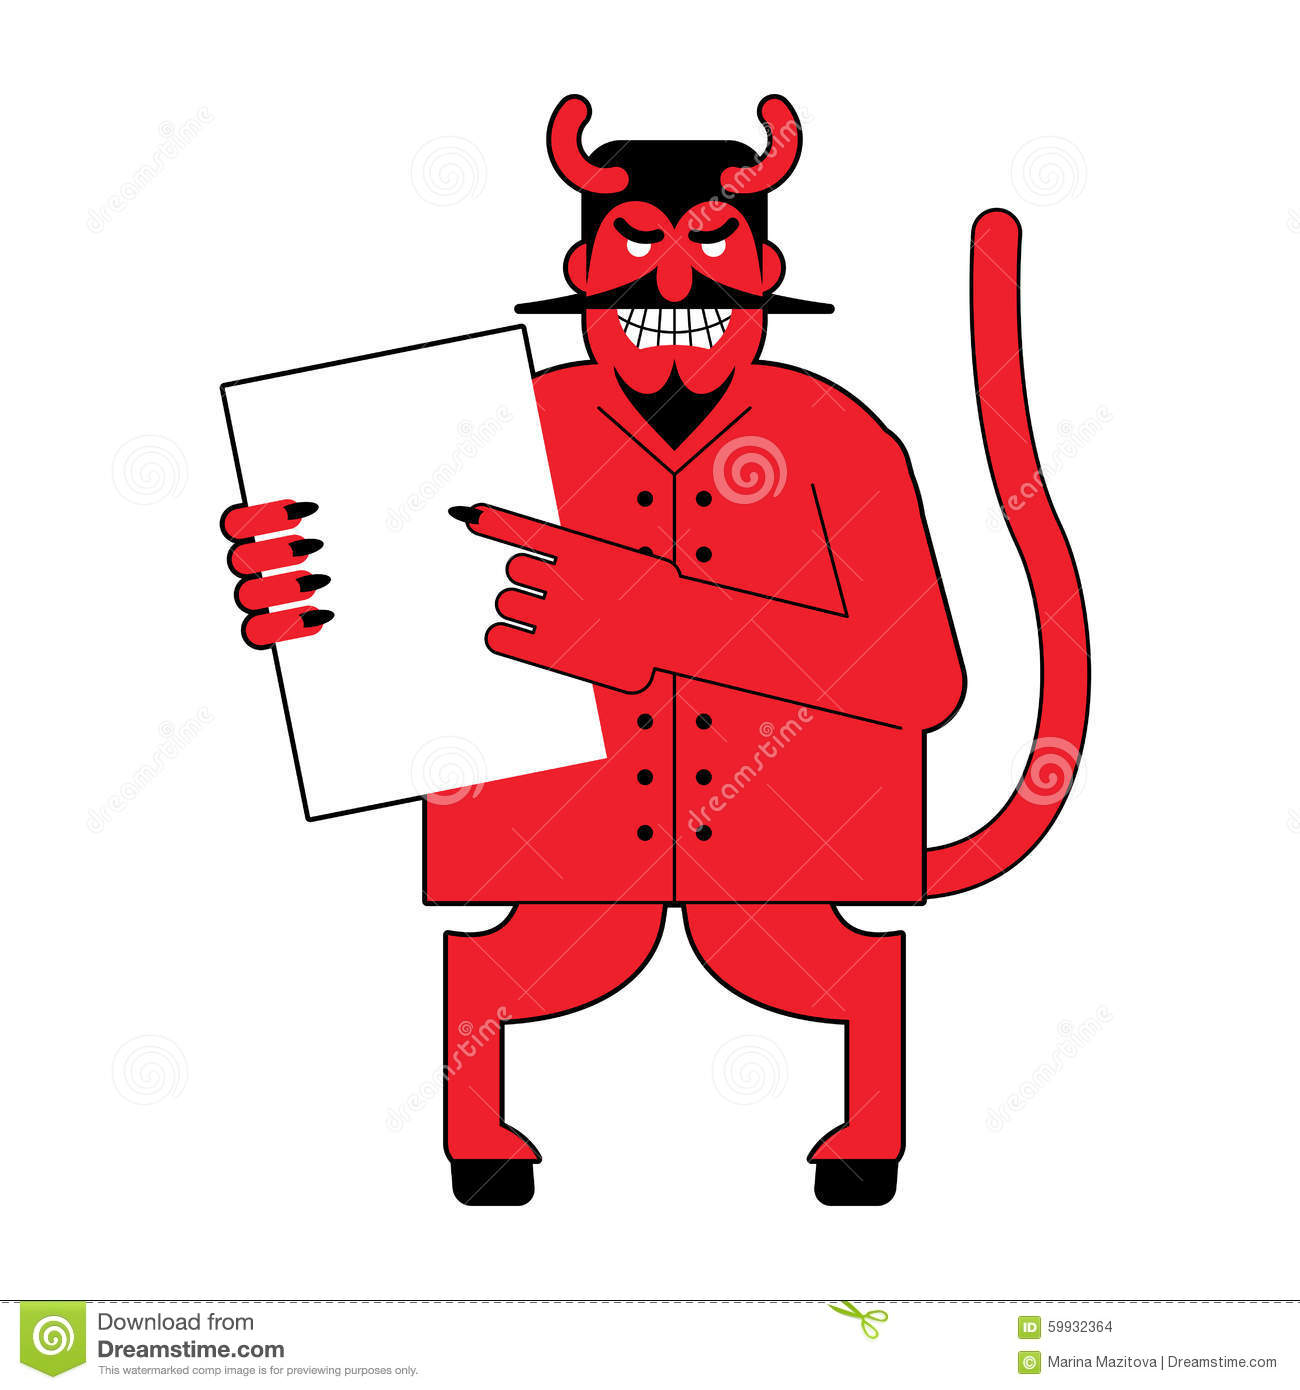 devil-contract-scary-mephistopheles-offers-deal-to-sign-i-blood-red-satan-document-horned-lucifer-holds-clean-59932364.jpg